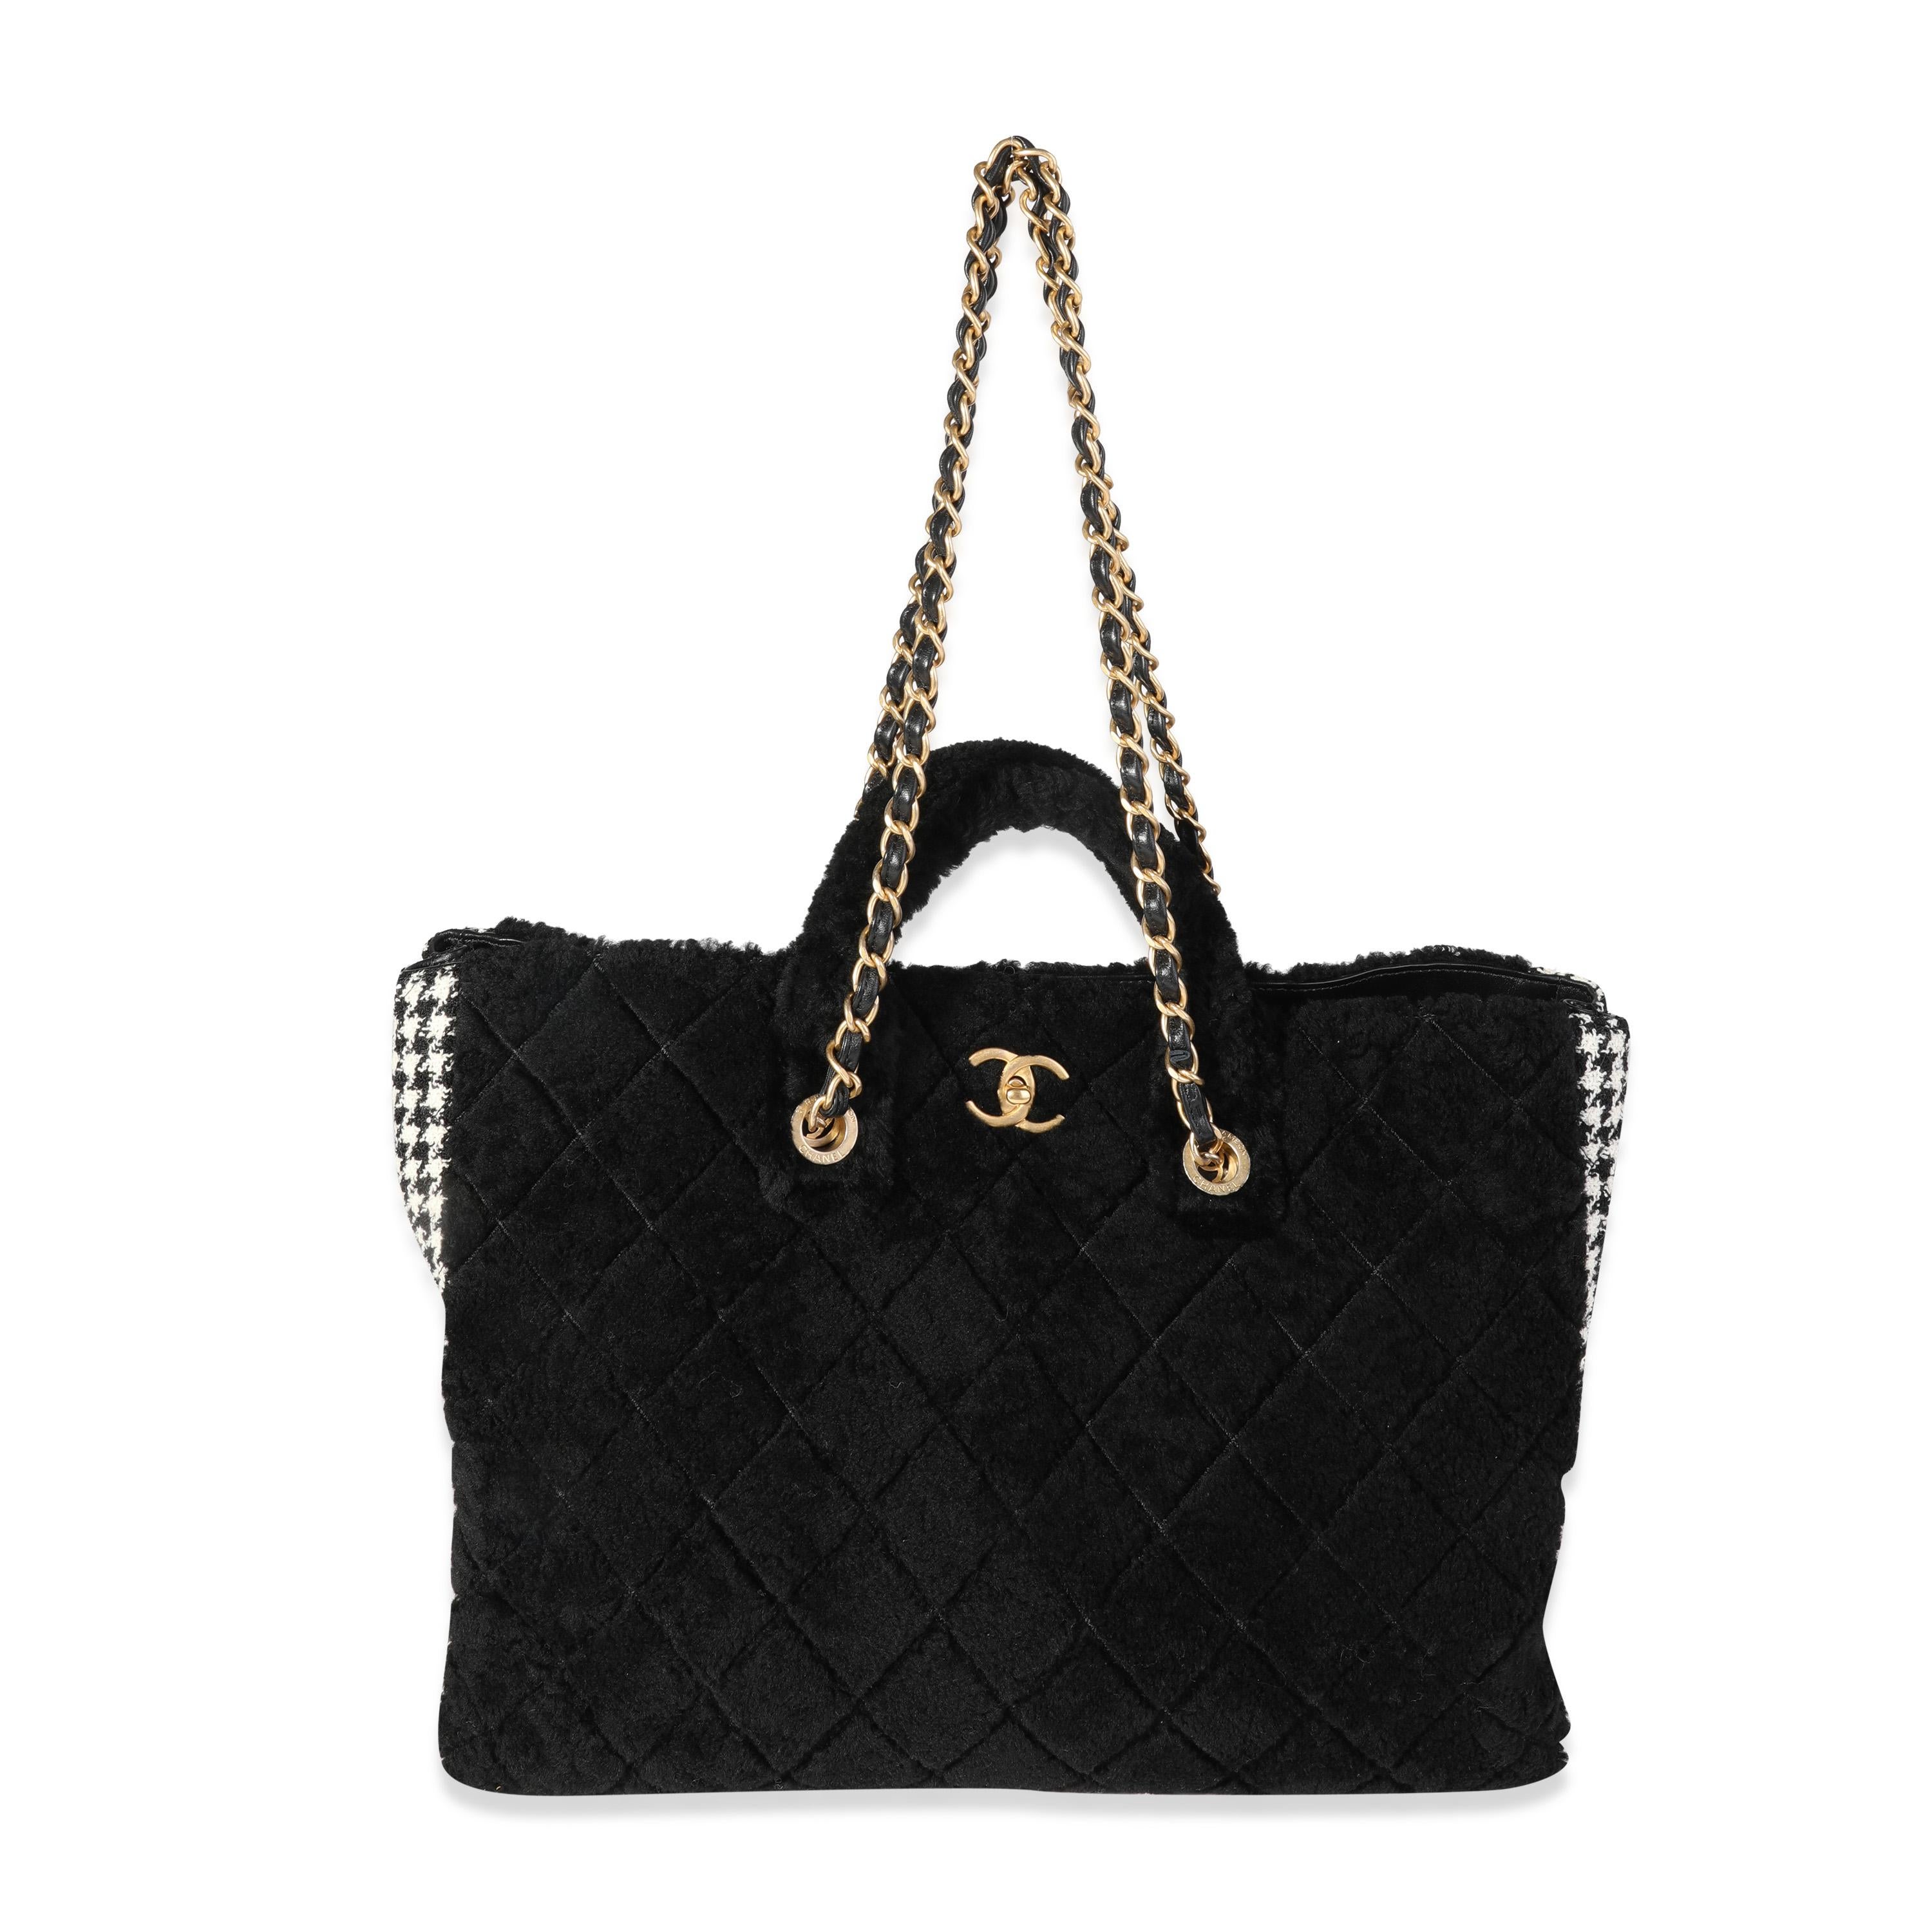 Listing Title: Chanel Black Shearling & Houndstooth Boucle Shopper Tote
SKU: 119900
Condition: Pre-owned (3000)
Handbag Condition: Never Worn
Brand: Chanel
Model: Black Shearling Tweed Shopper Tote
Origin Country: France
Handbag Silhouette: